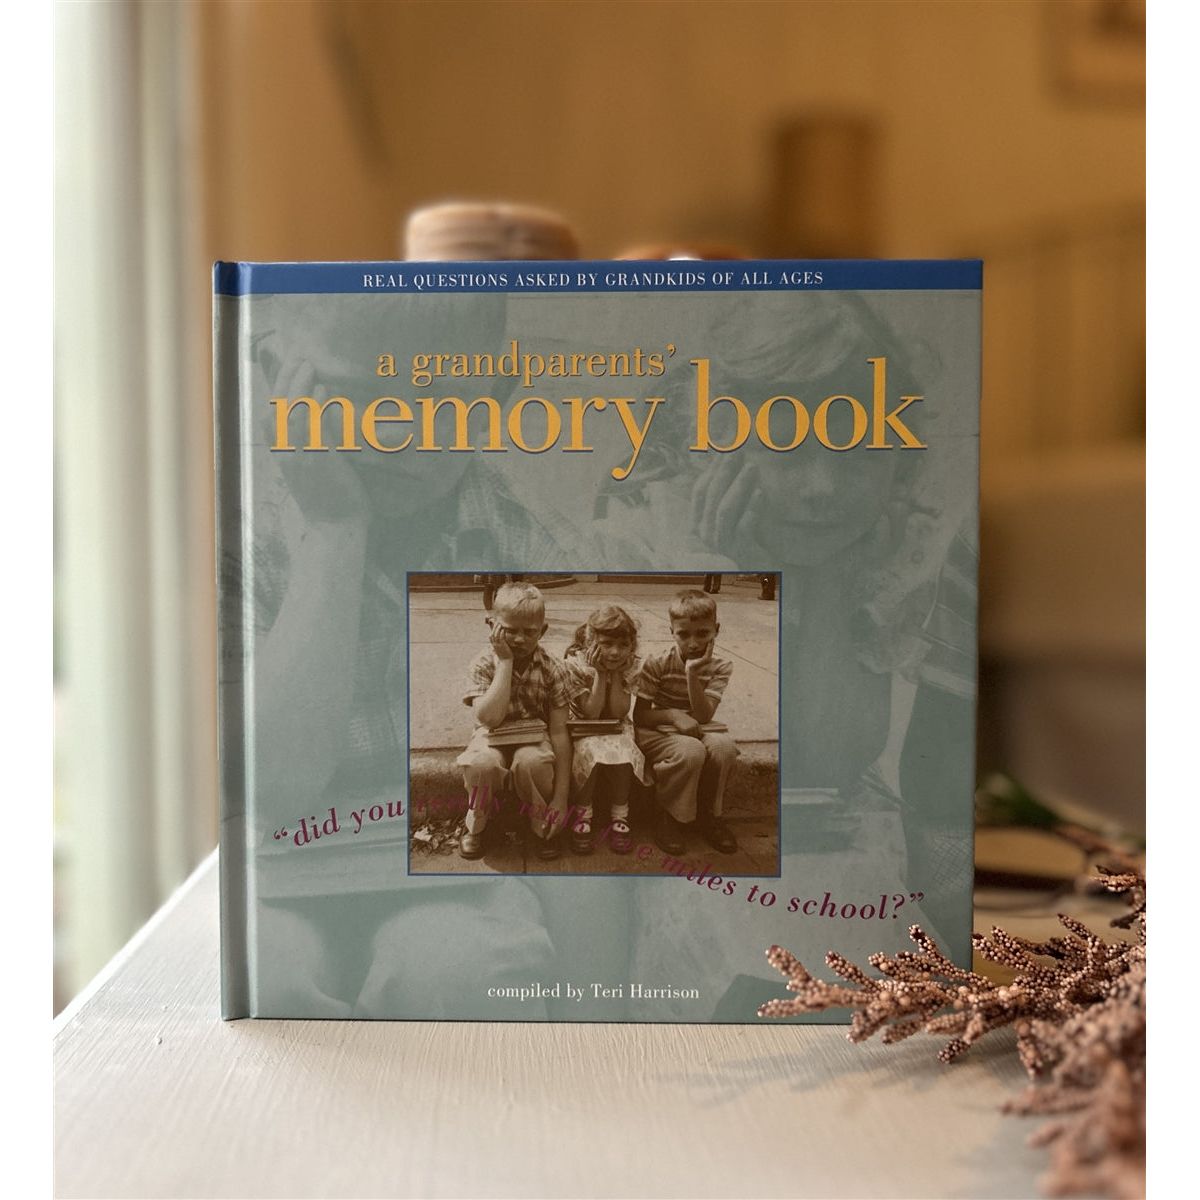 The grandparent memory book standing on a table. 